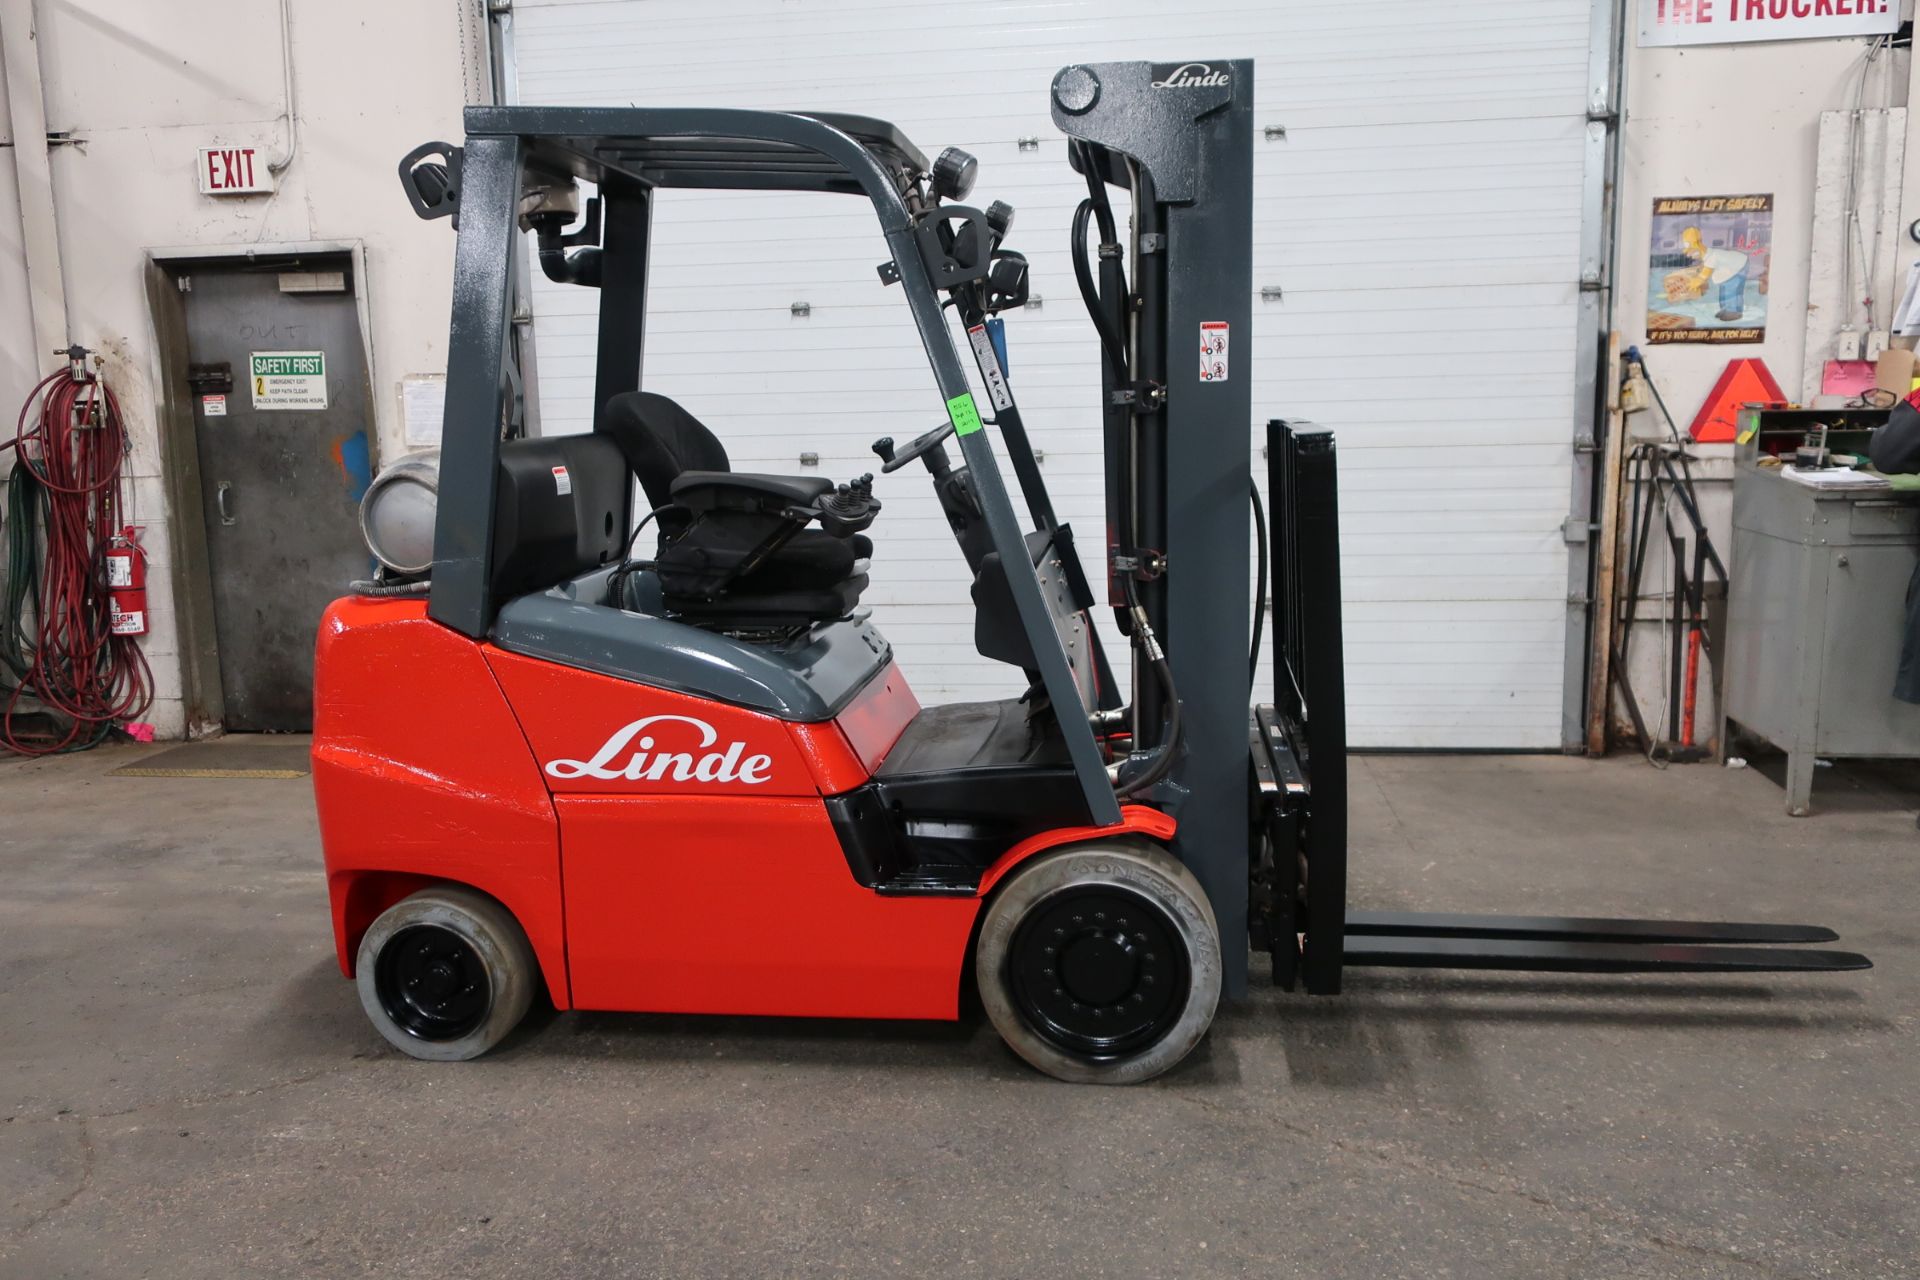 FREE CUSTOMS DOCS & 0 DUTY FEES - 2014 Linde 5250lbs Capacity Forklift with sideshift - LPG